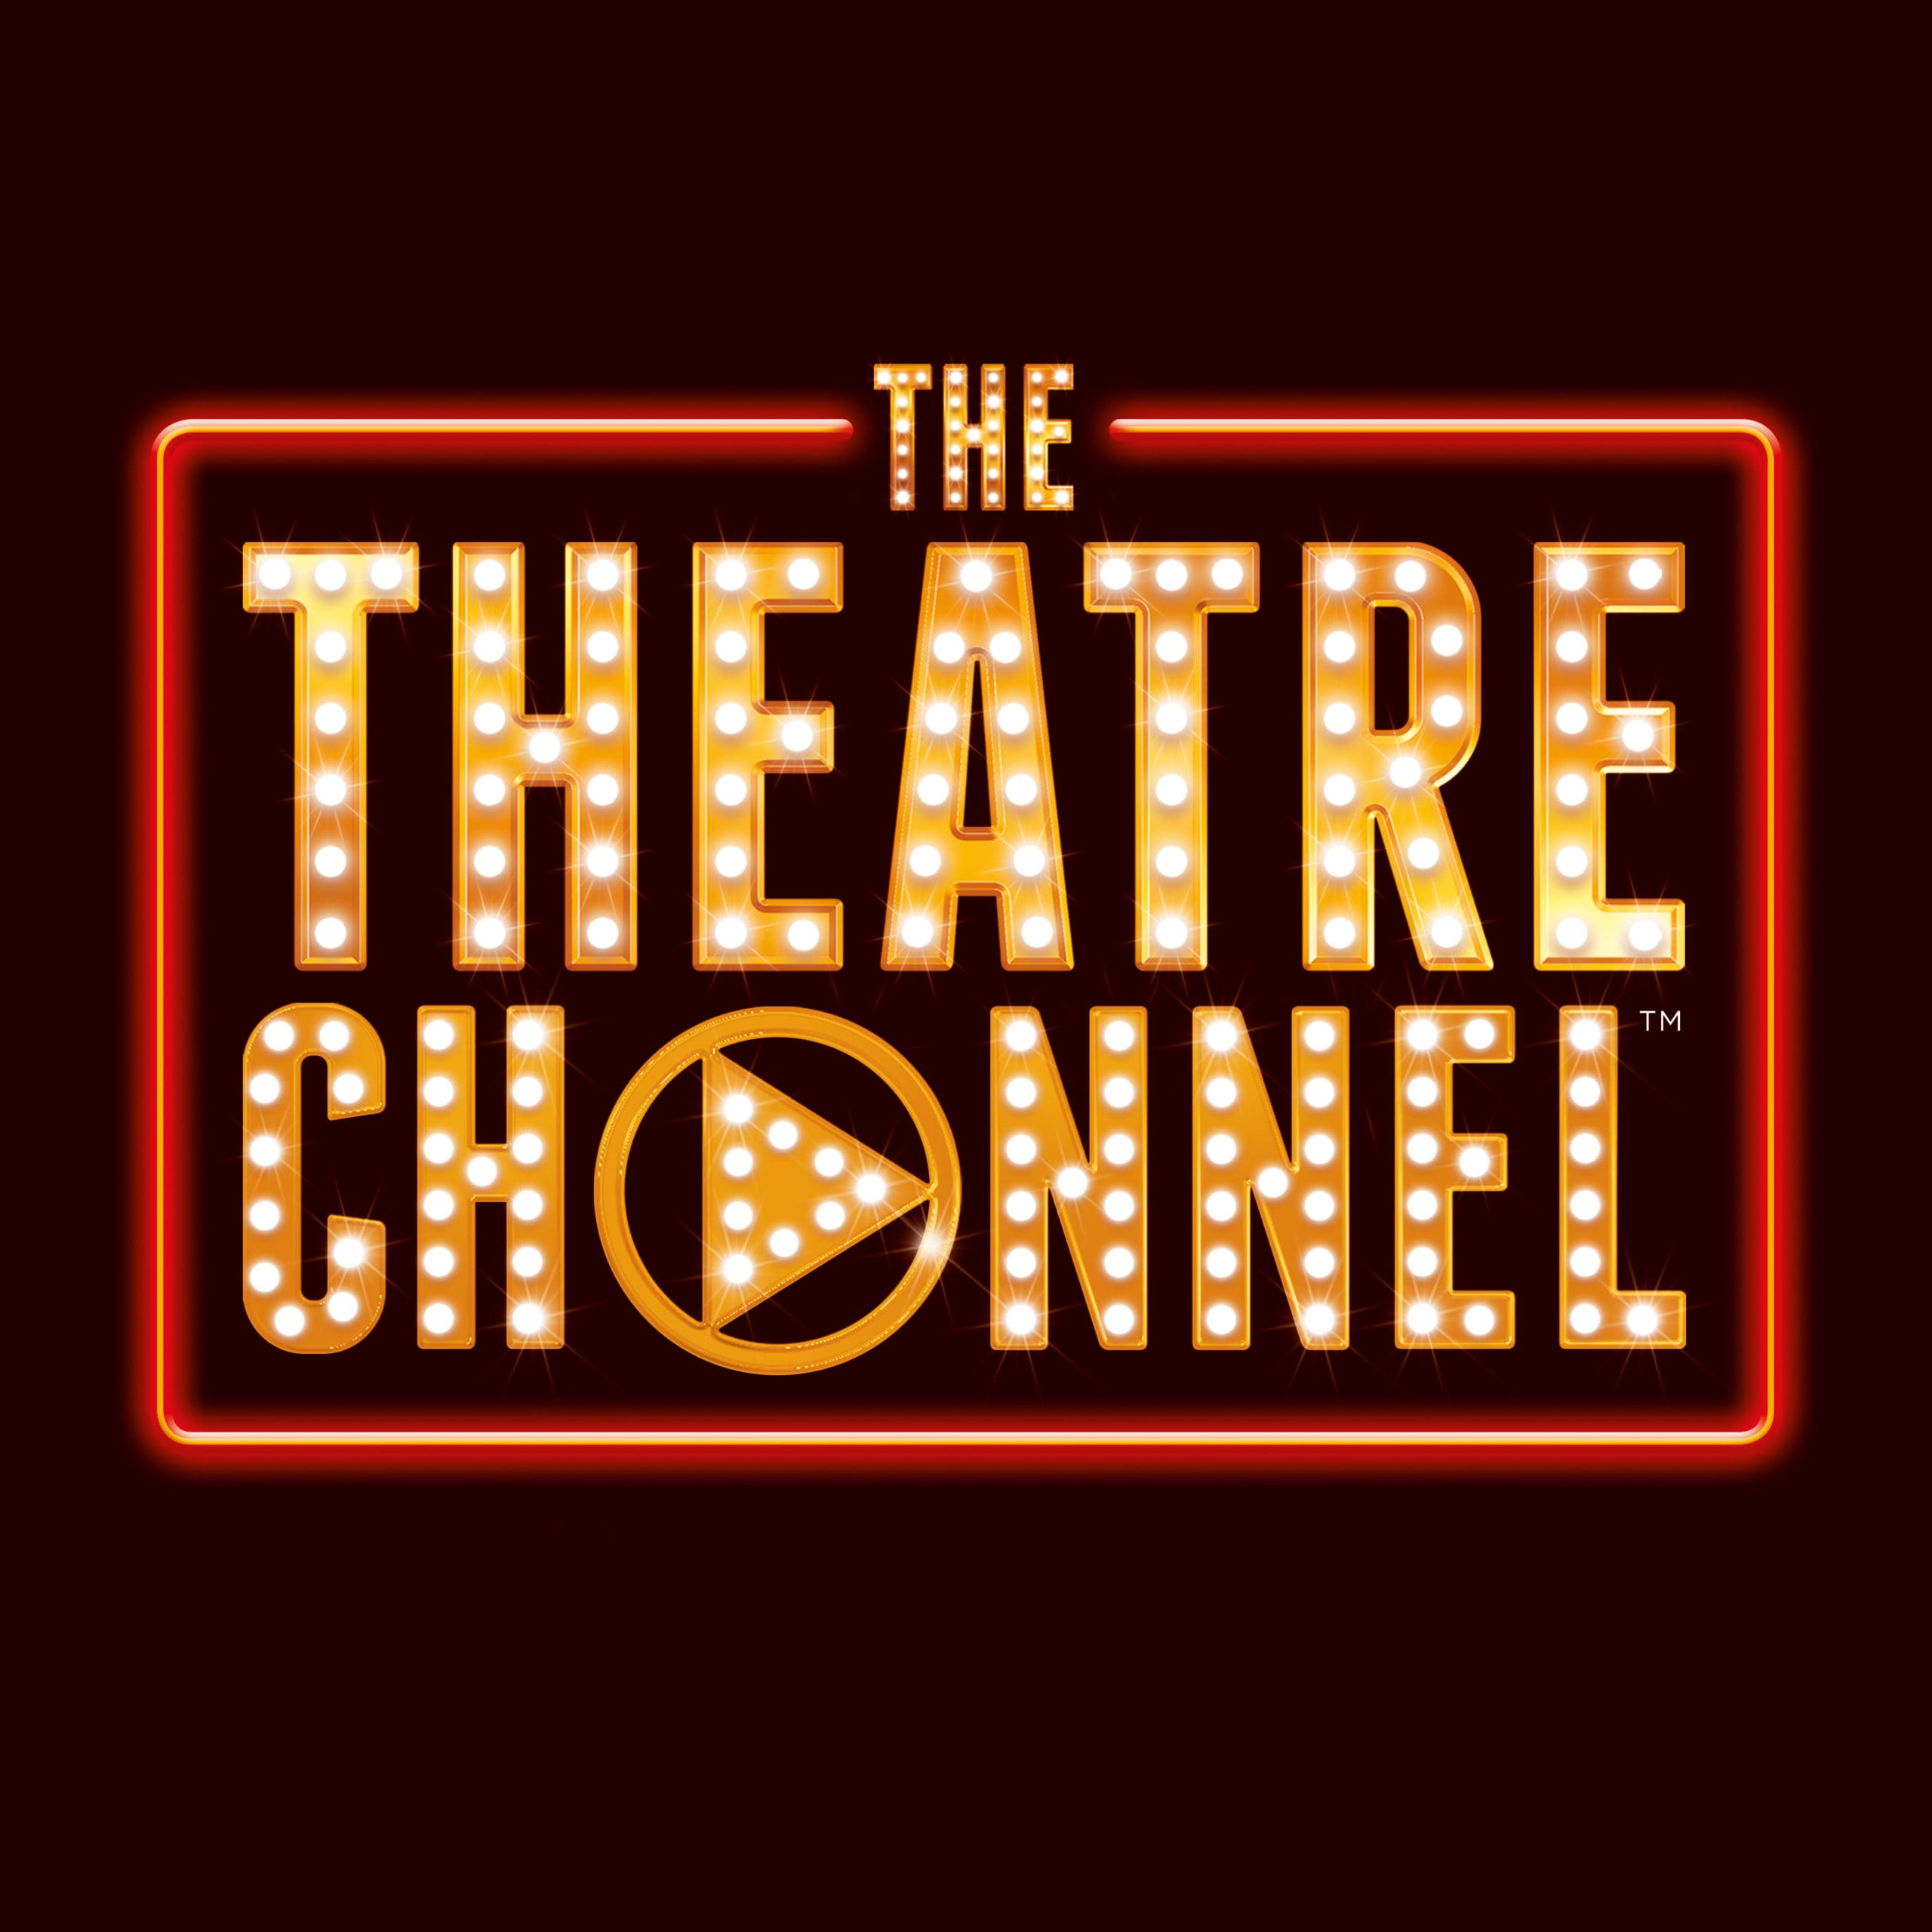 The Theatre Channel – Episode One is on sale now and premieres on Friday 2 October